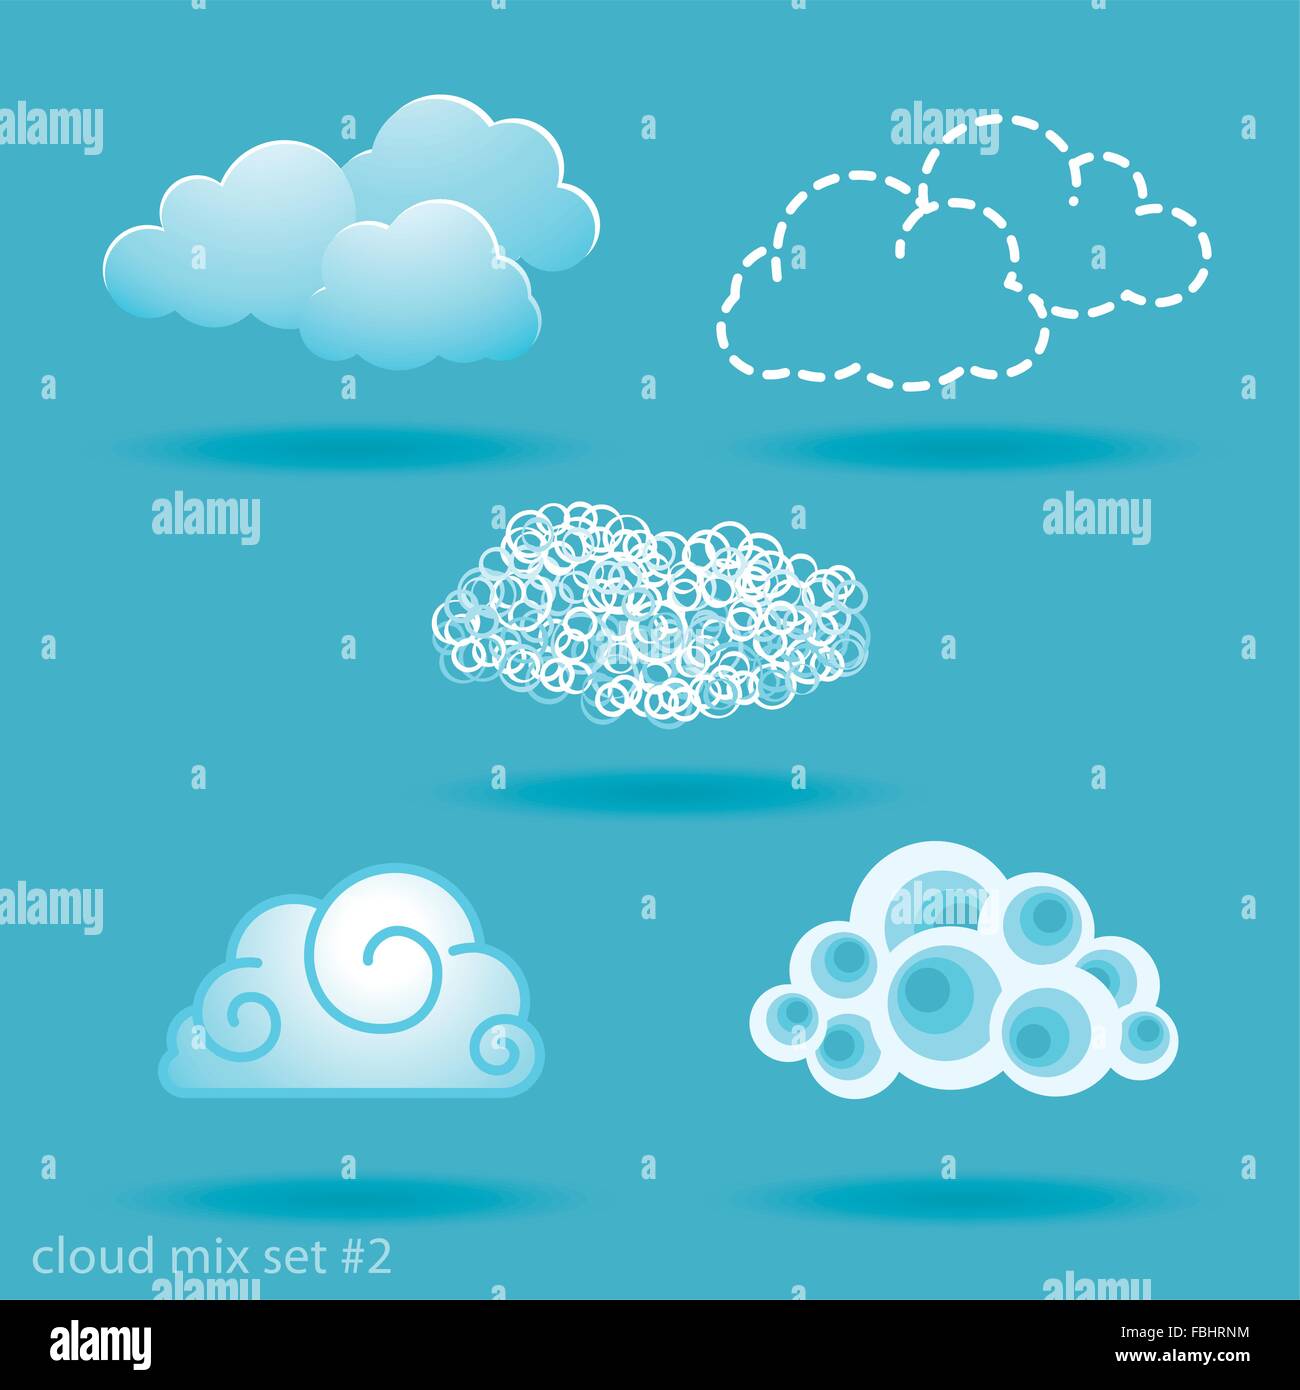 All types of weather Stock Vector Images - Alamy